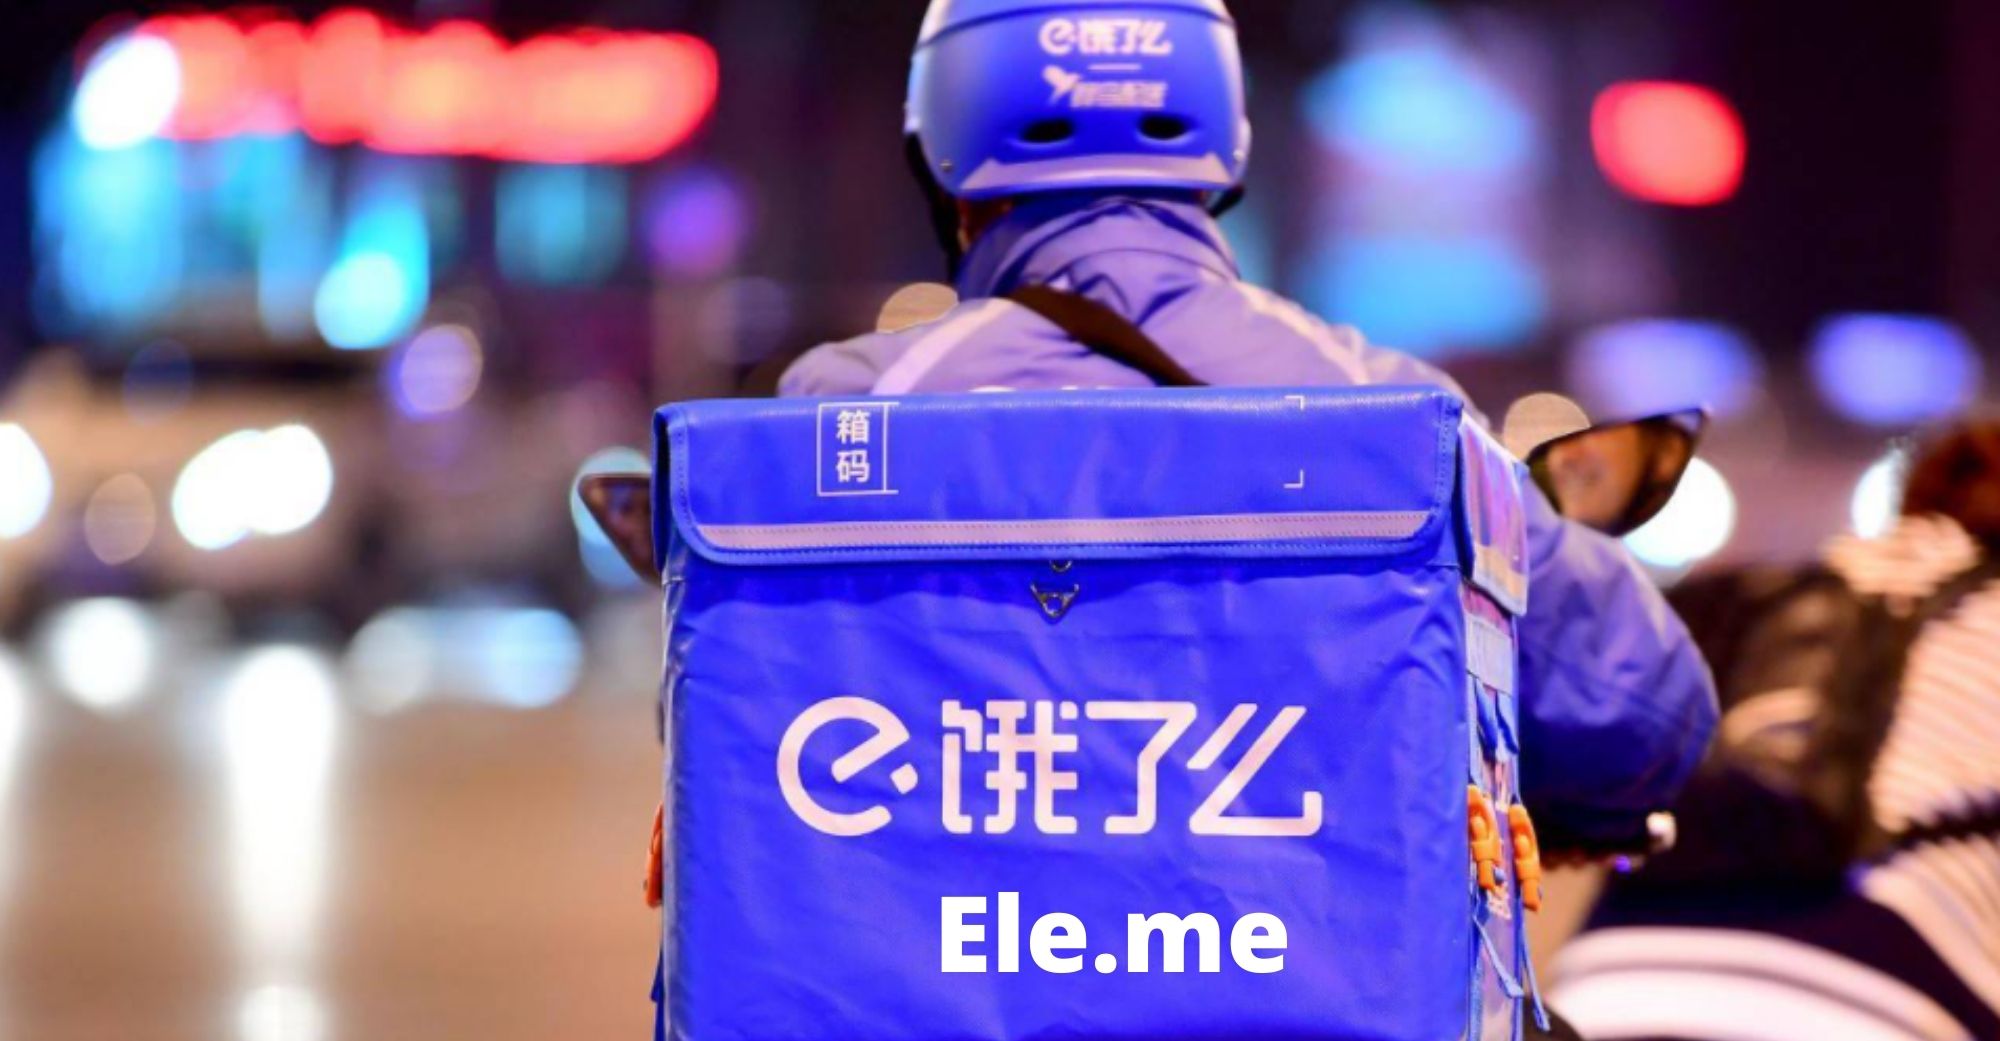 ByteDance in Talks to Acquire Ele.me, Acquisition Denied by Ele.me